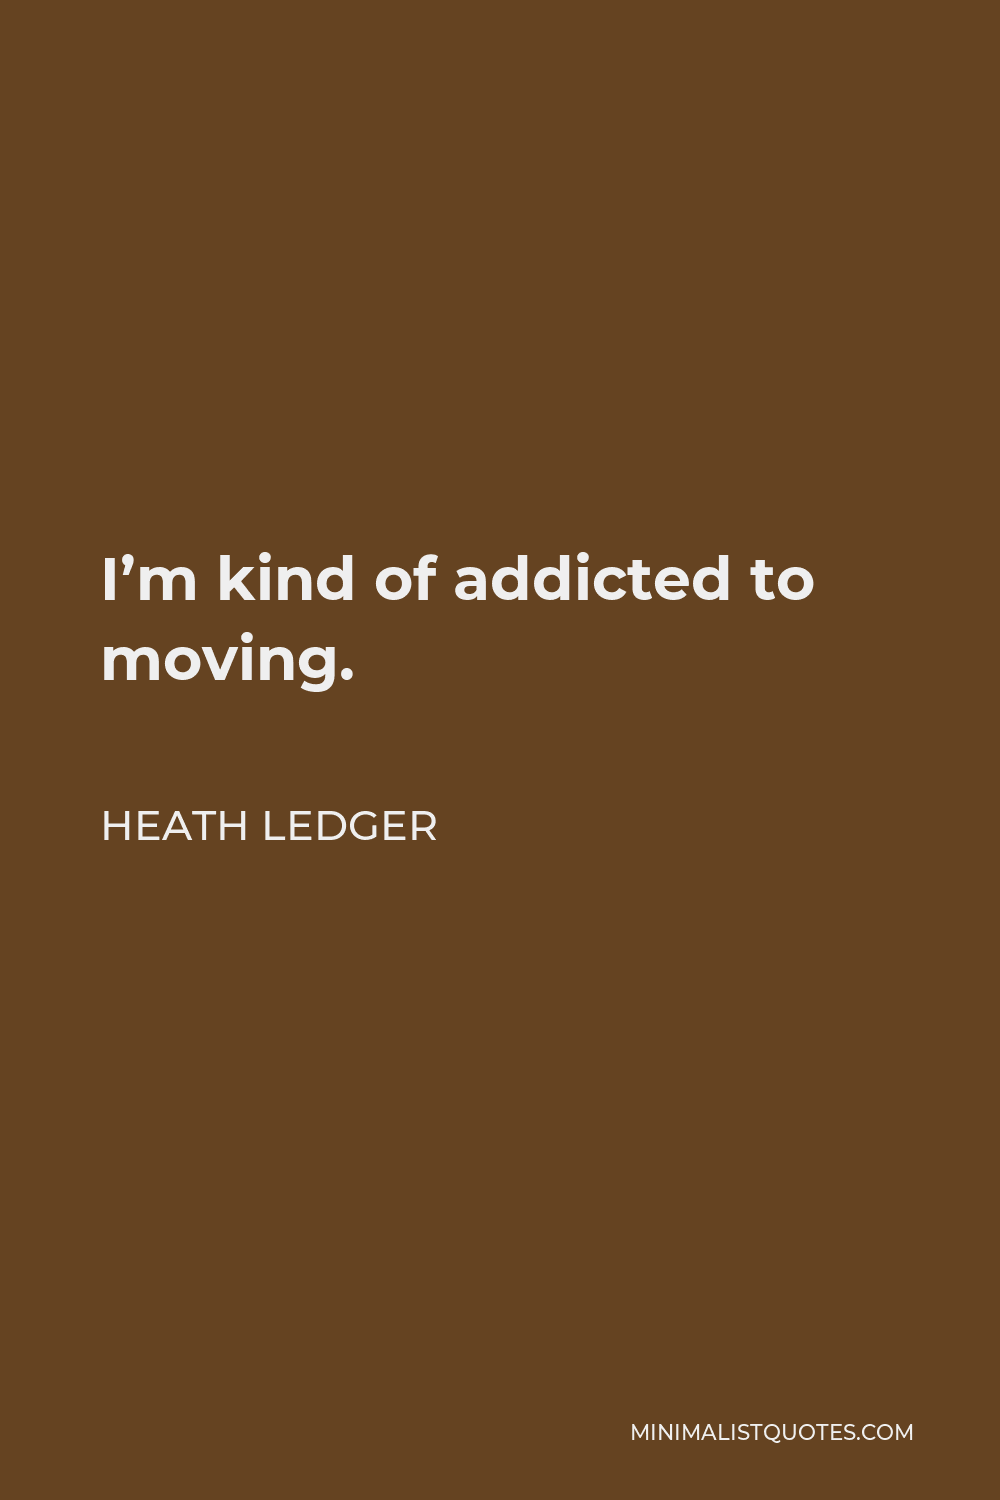 Heath Ledger Quote - I’m kind of addicted to moving.